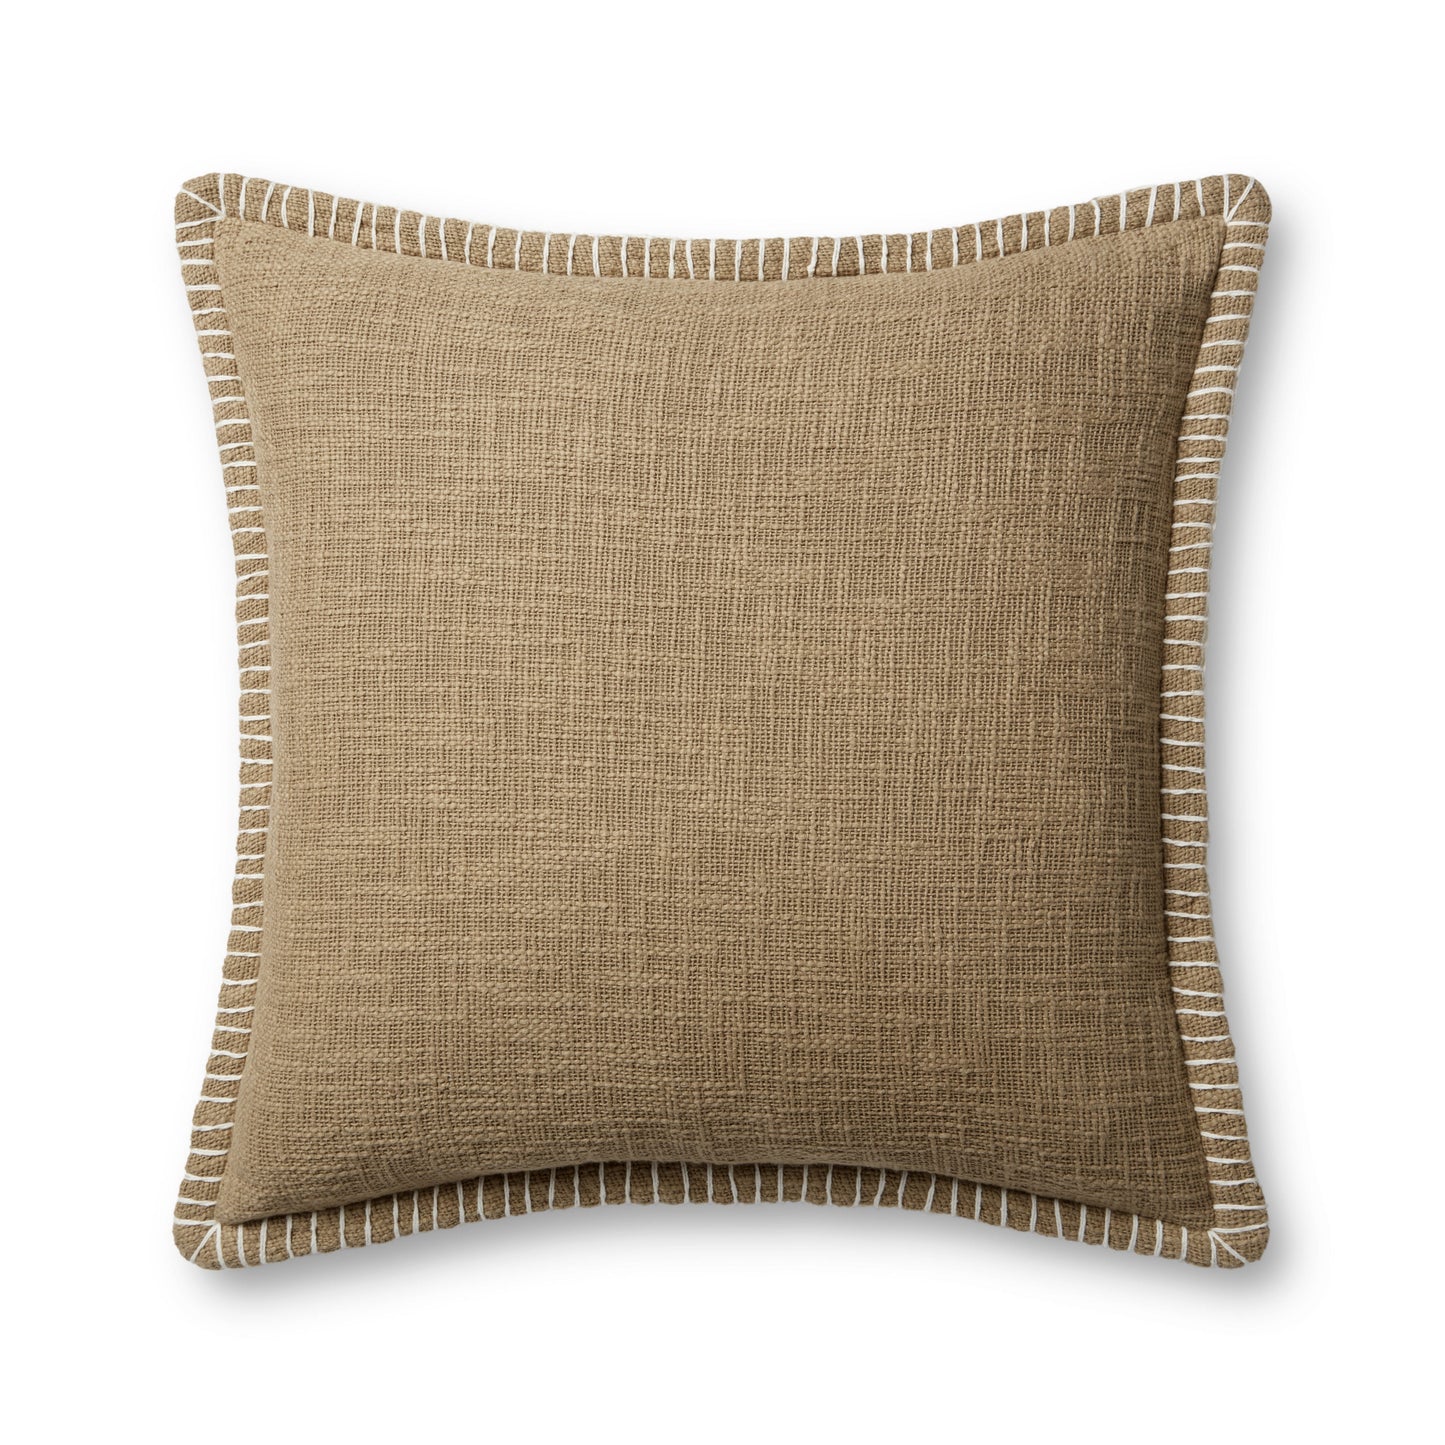 Photo of a pillow;  PLL0109 Taupe 22'' x 22'' Cover w/Poly Pillow